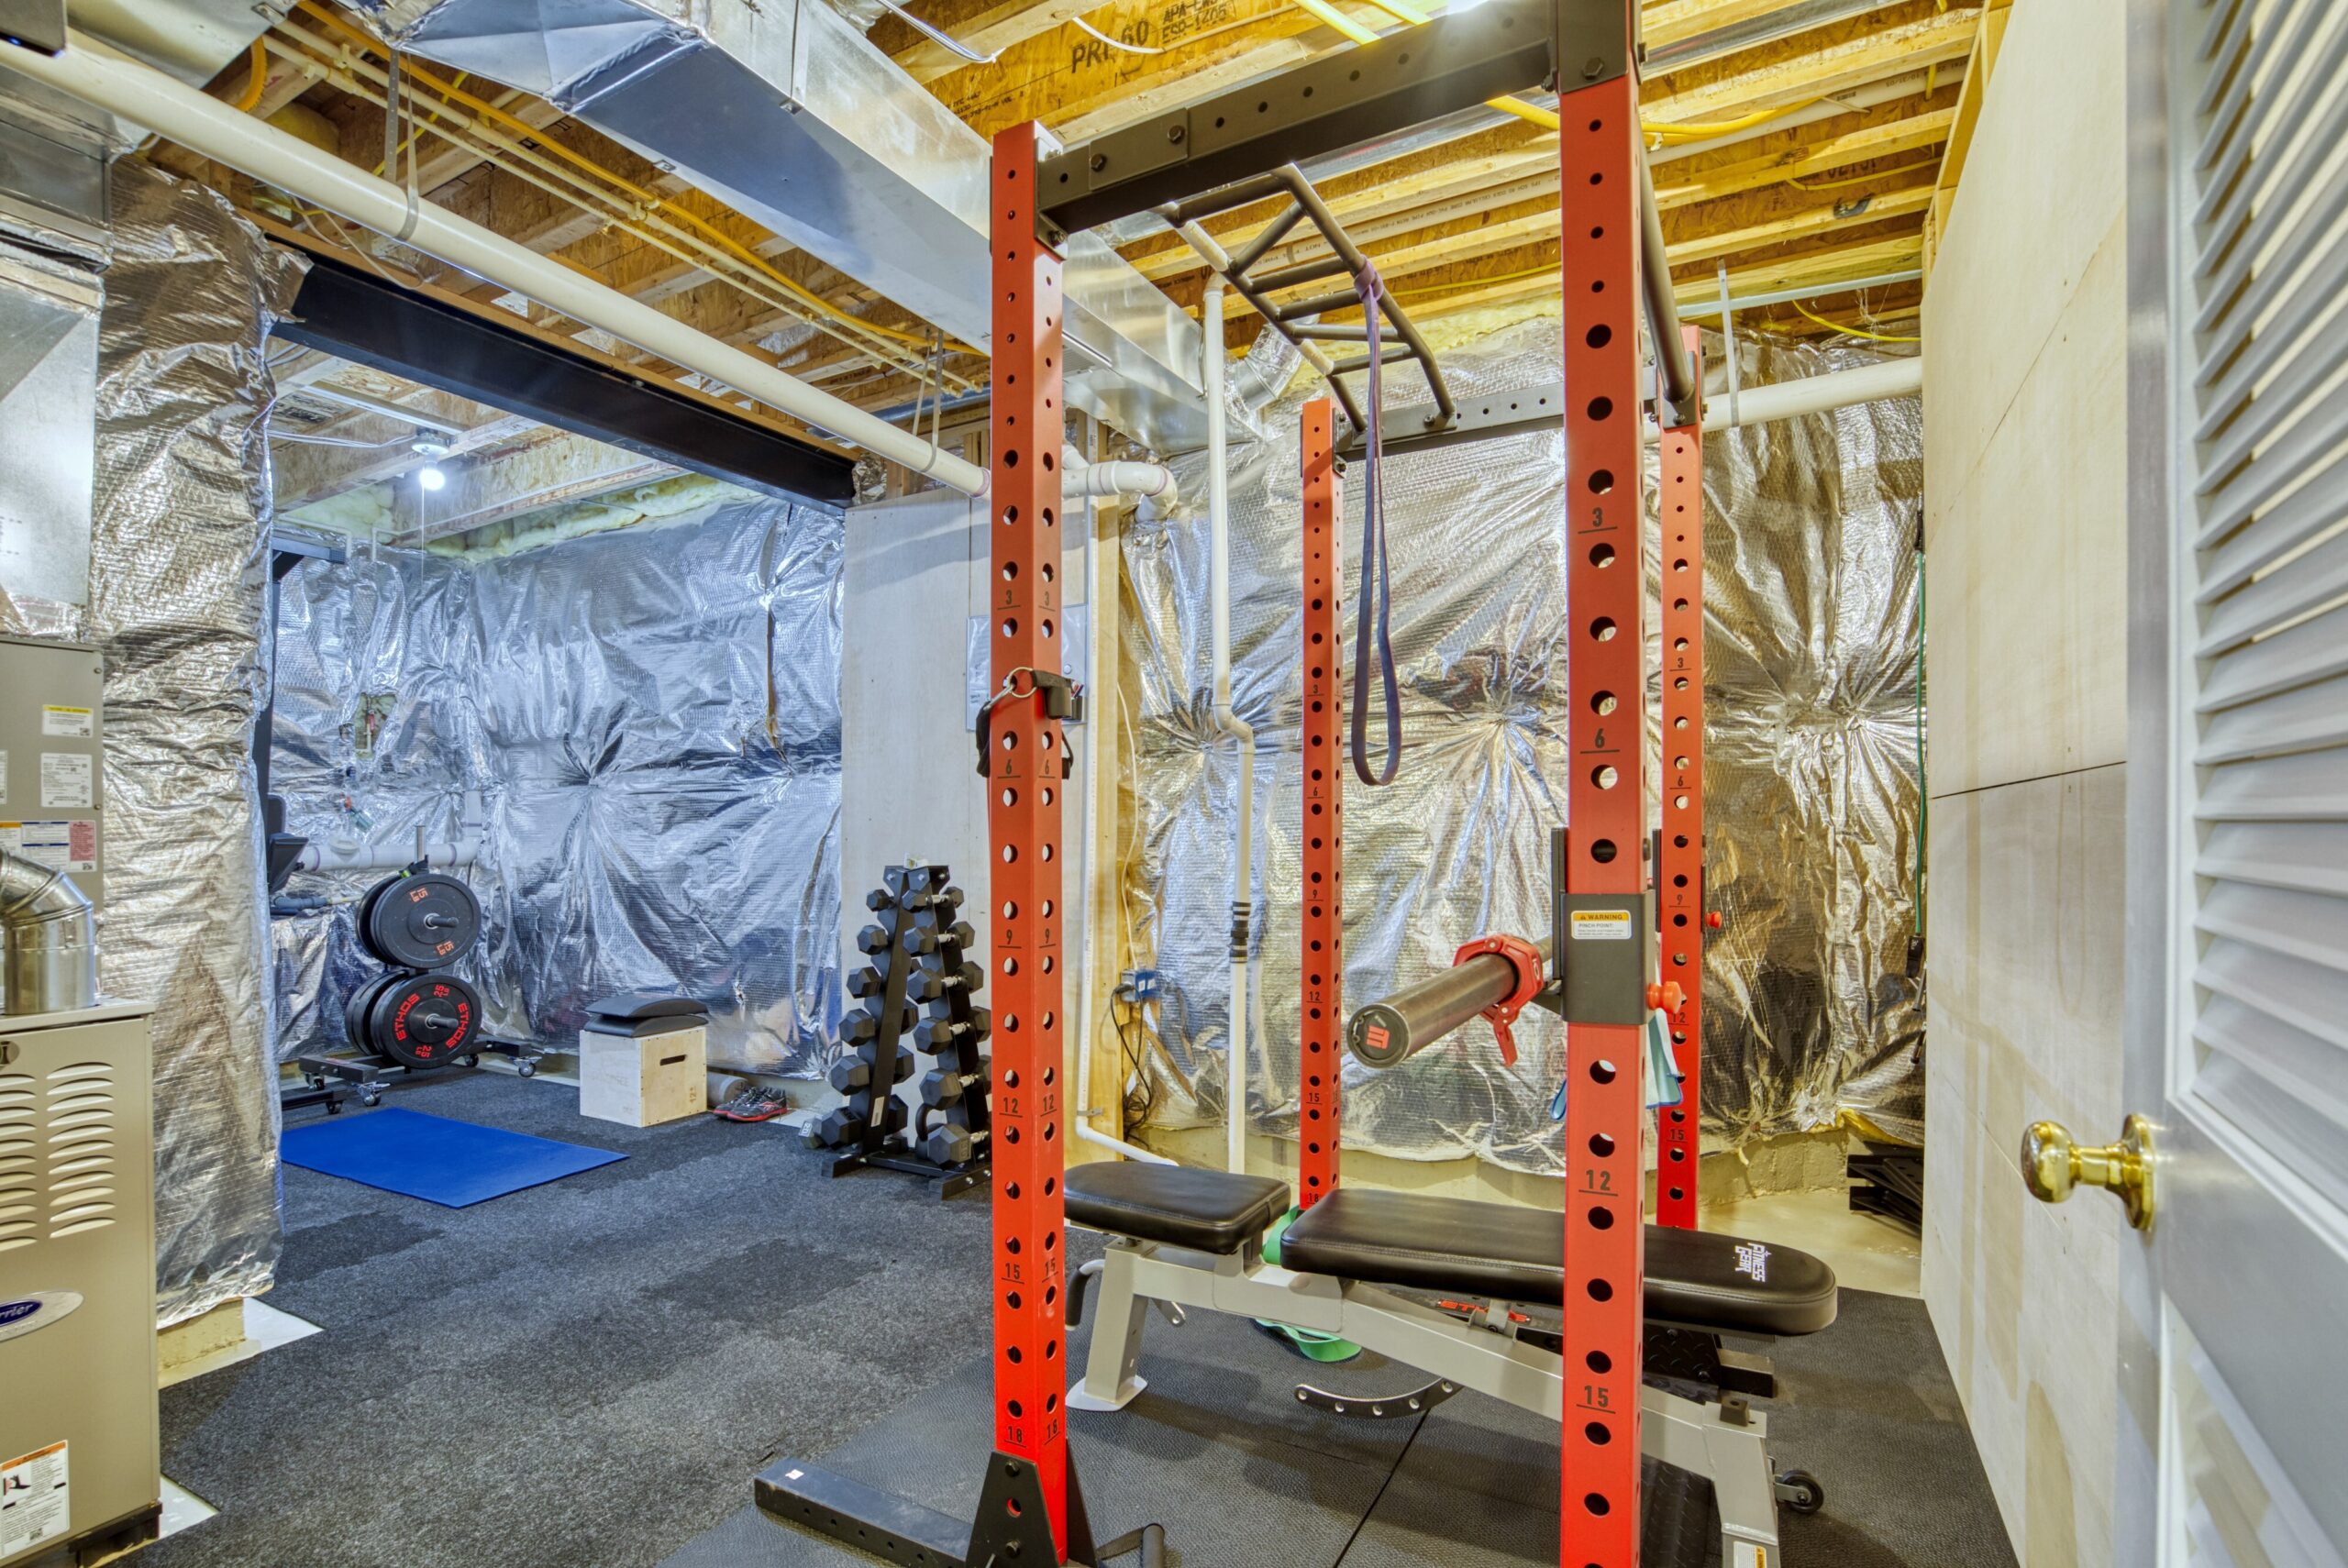 Basement unfinished area in a 3-story townhome with exercise equipment including a large squat rack